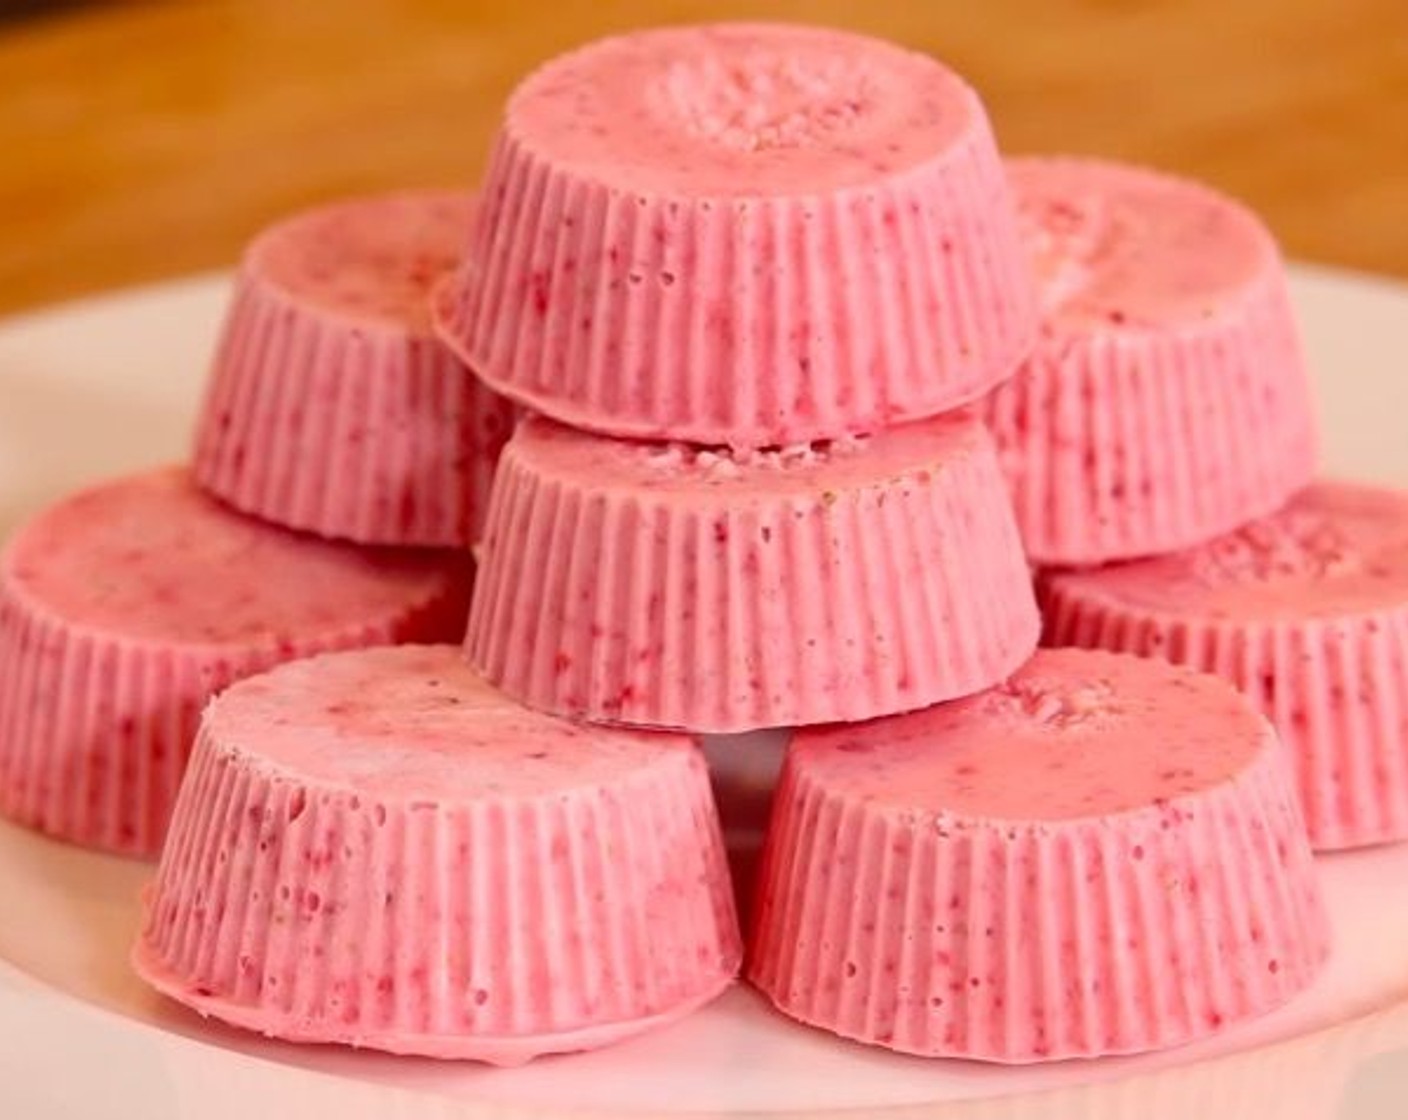 Strawberry Fat Bombs